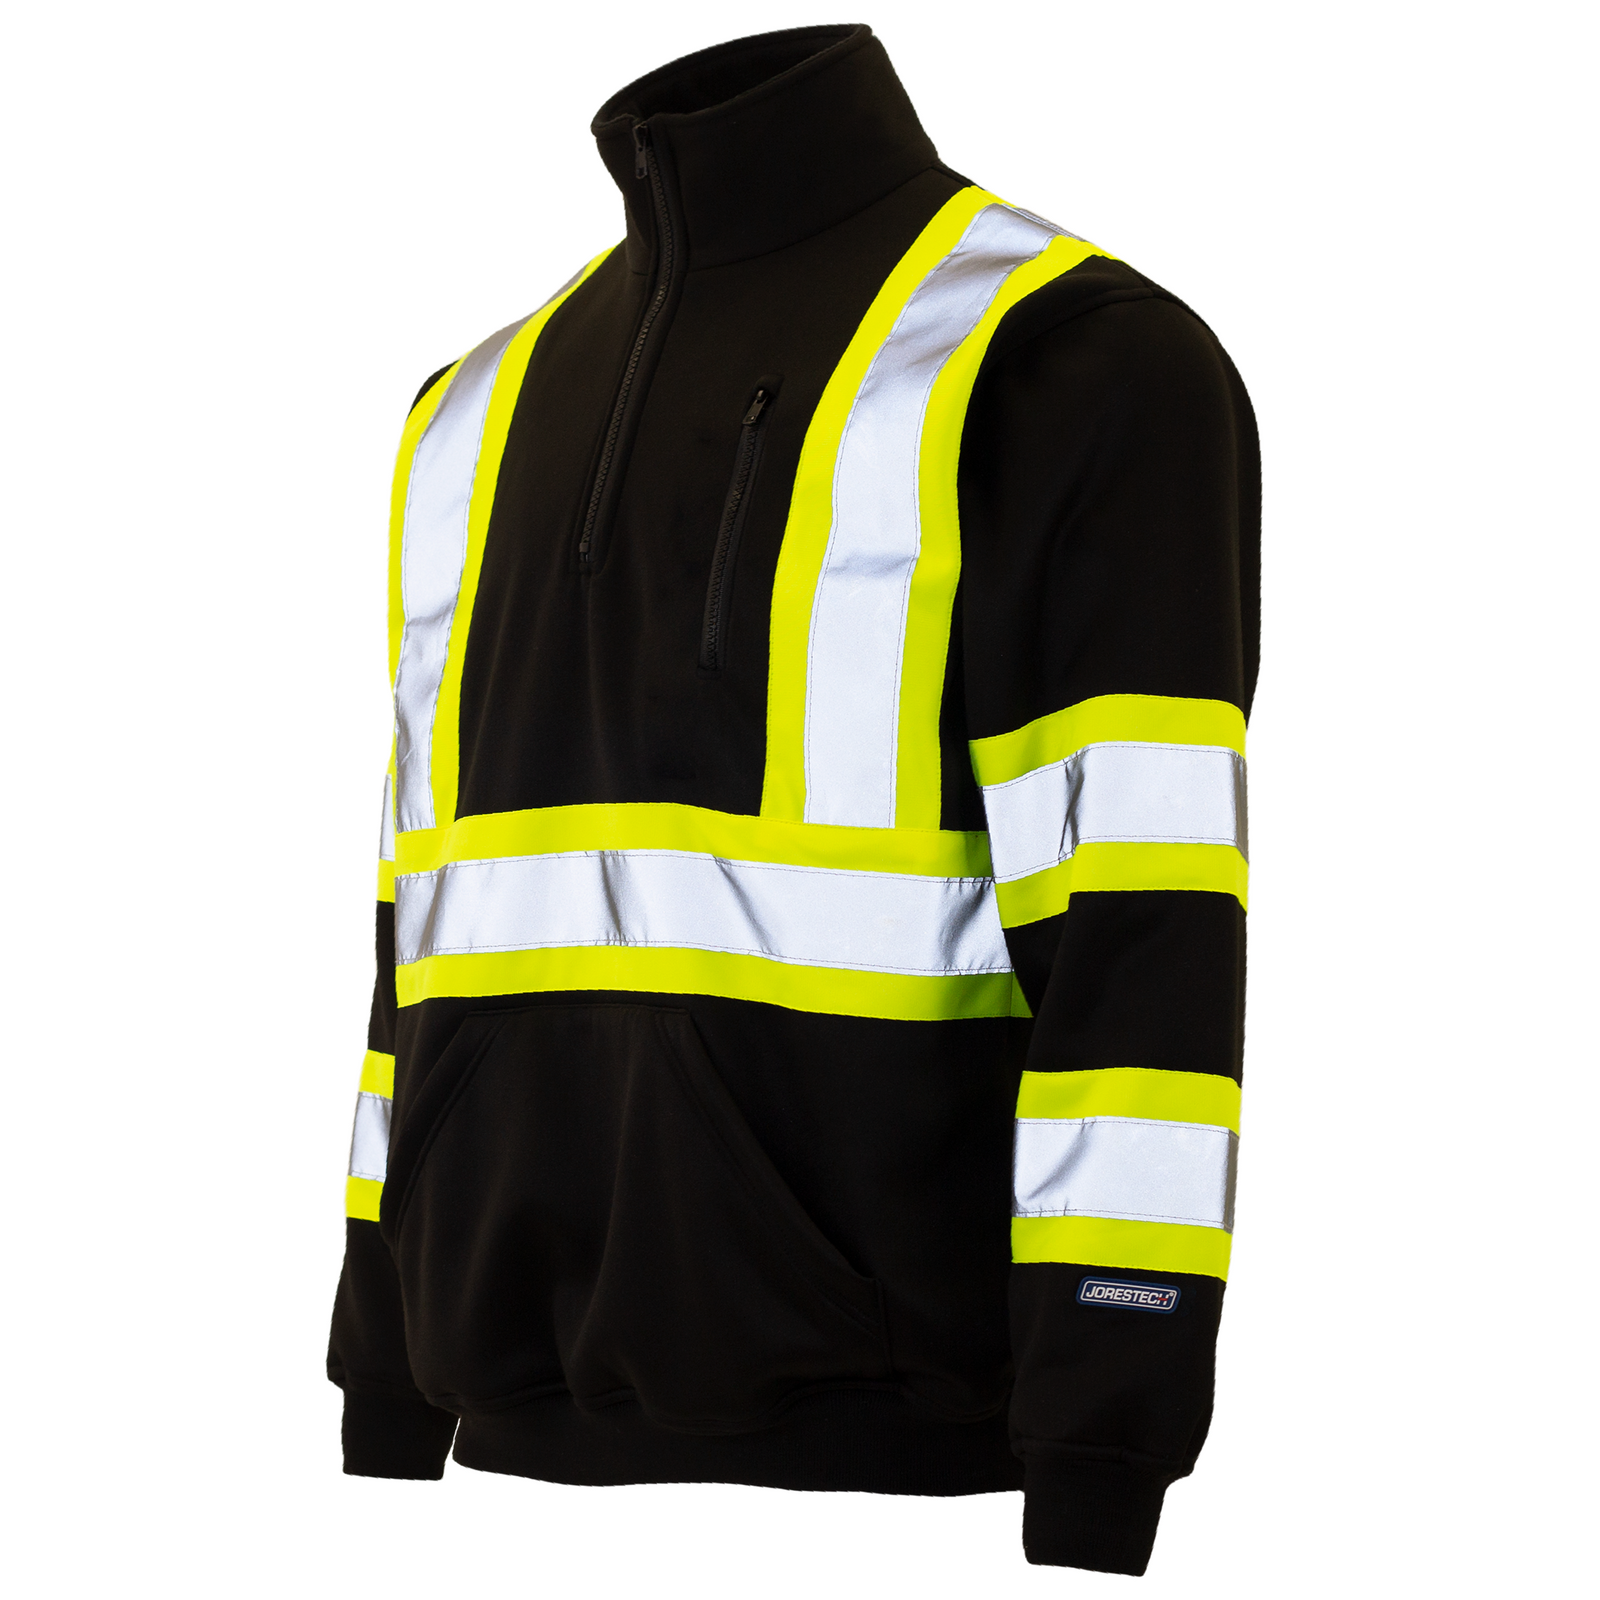 Black and yellow hi vis safety sweater with 2